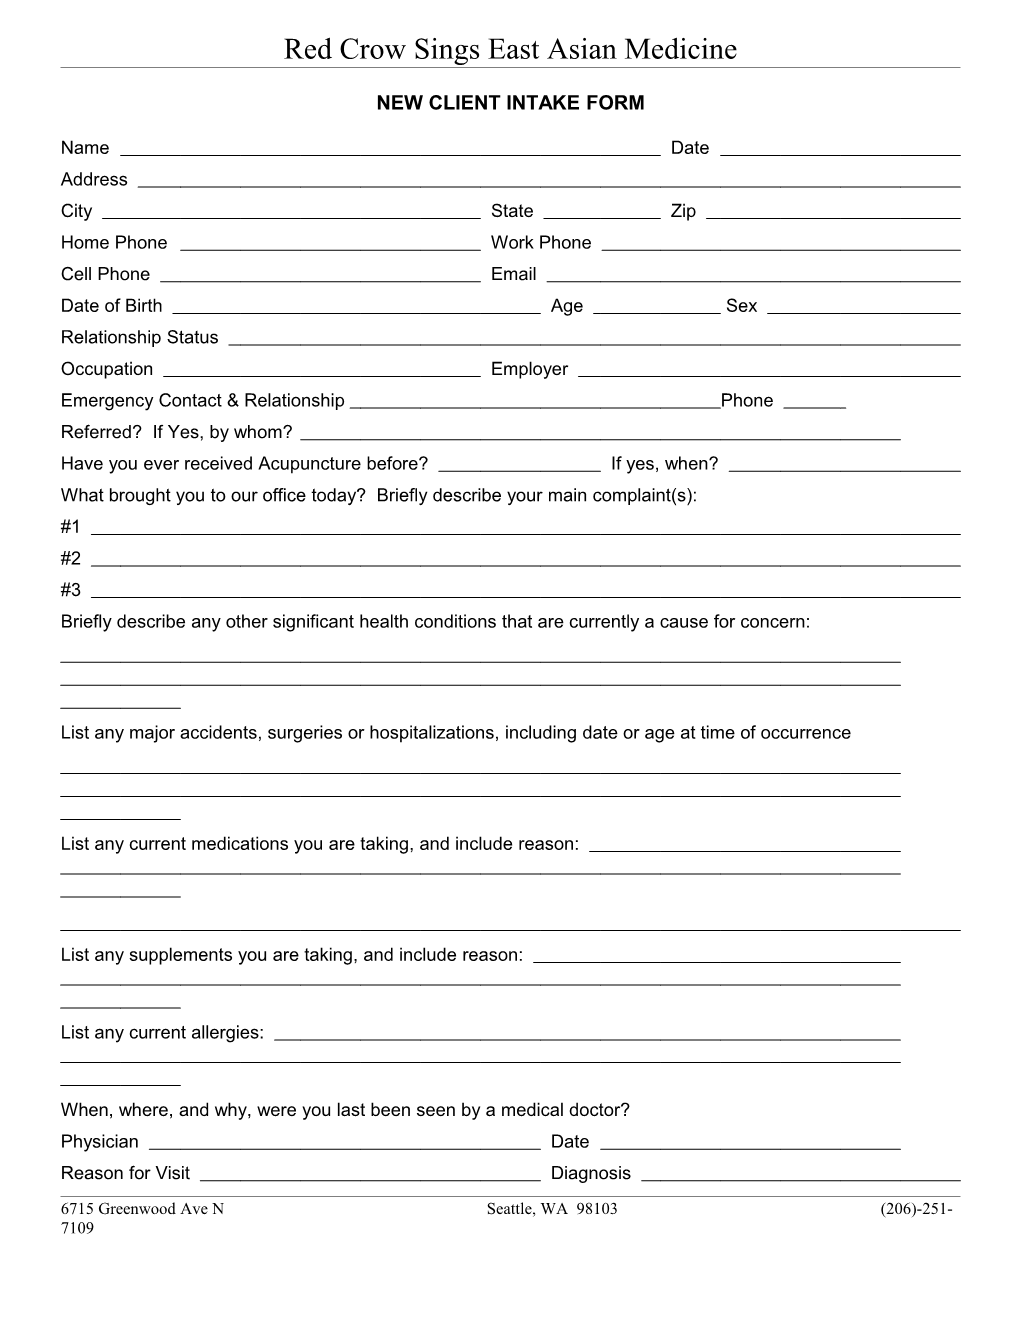 New Patient Intake Form s1